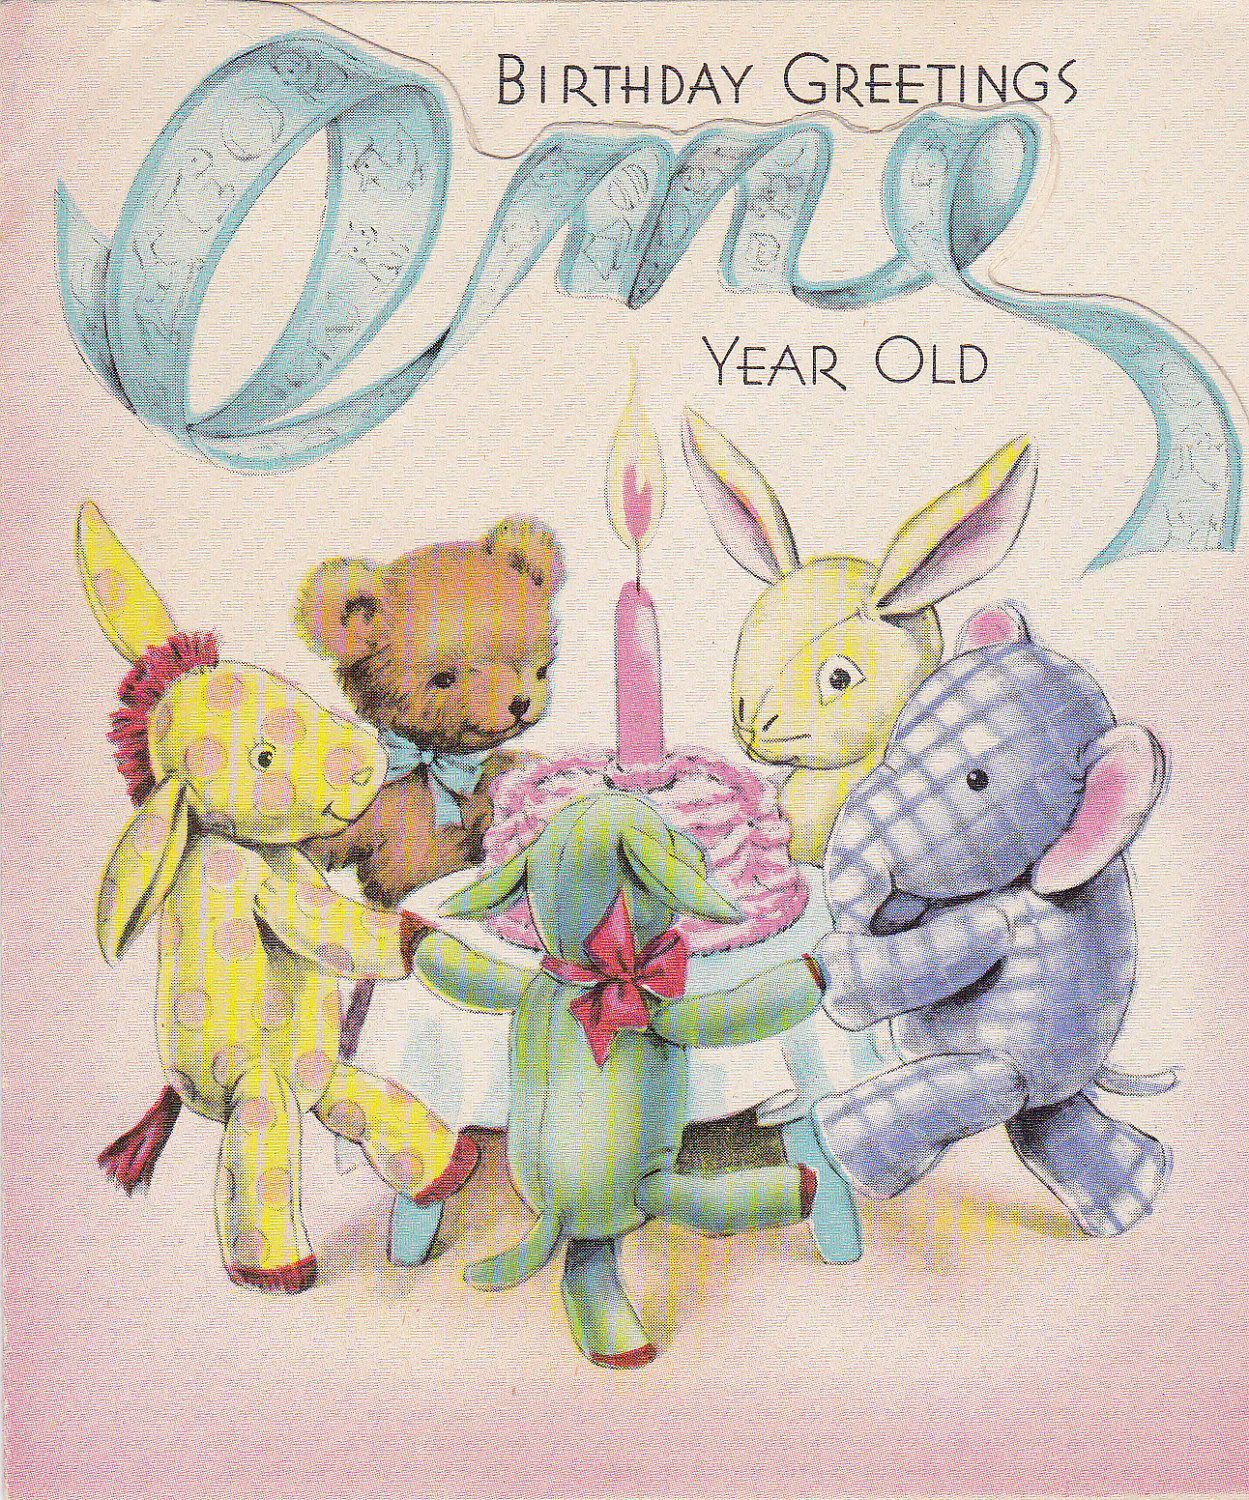 Best ideas about 1 Year Old Birthday Card
. Save or Pin Birthday Greetings e Year Old 1940s Vintage Greeting Card Now.